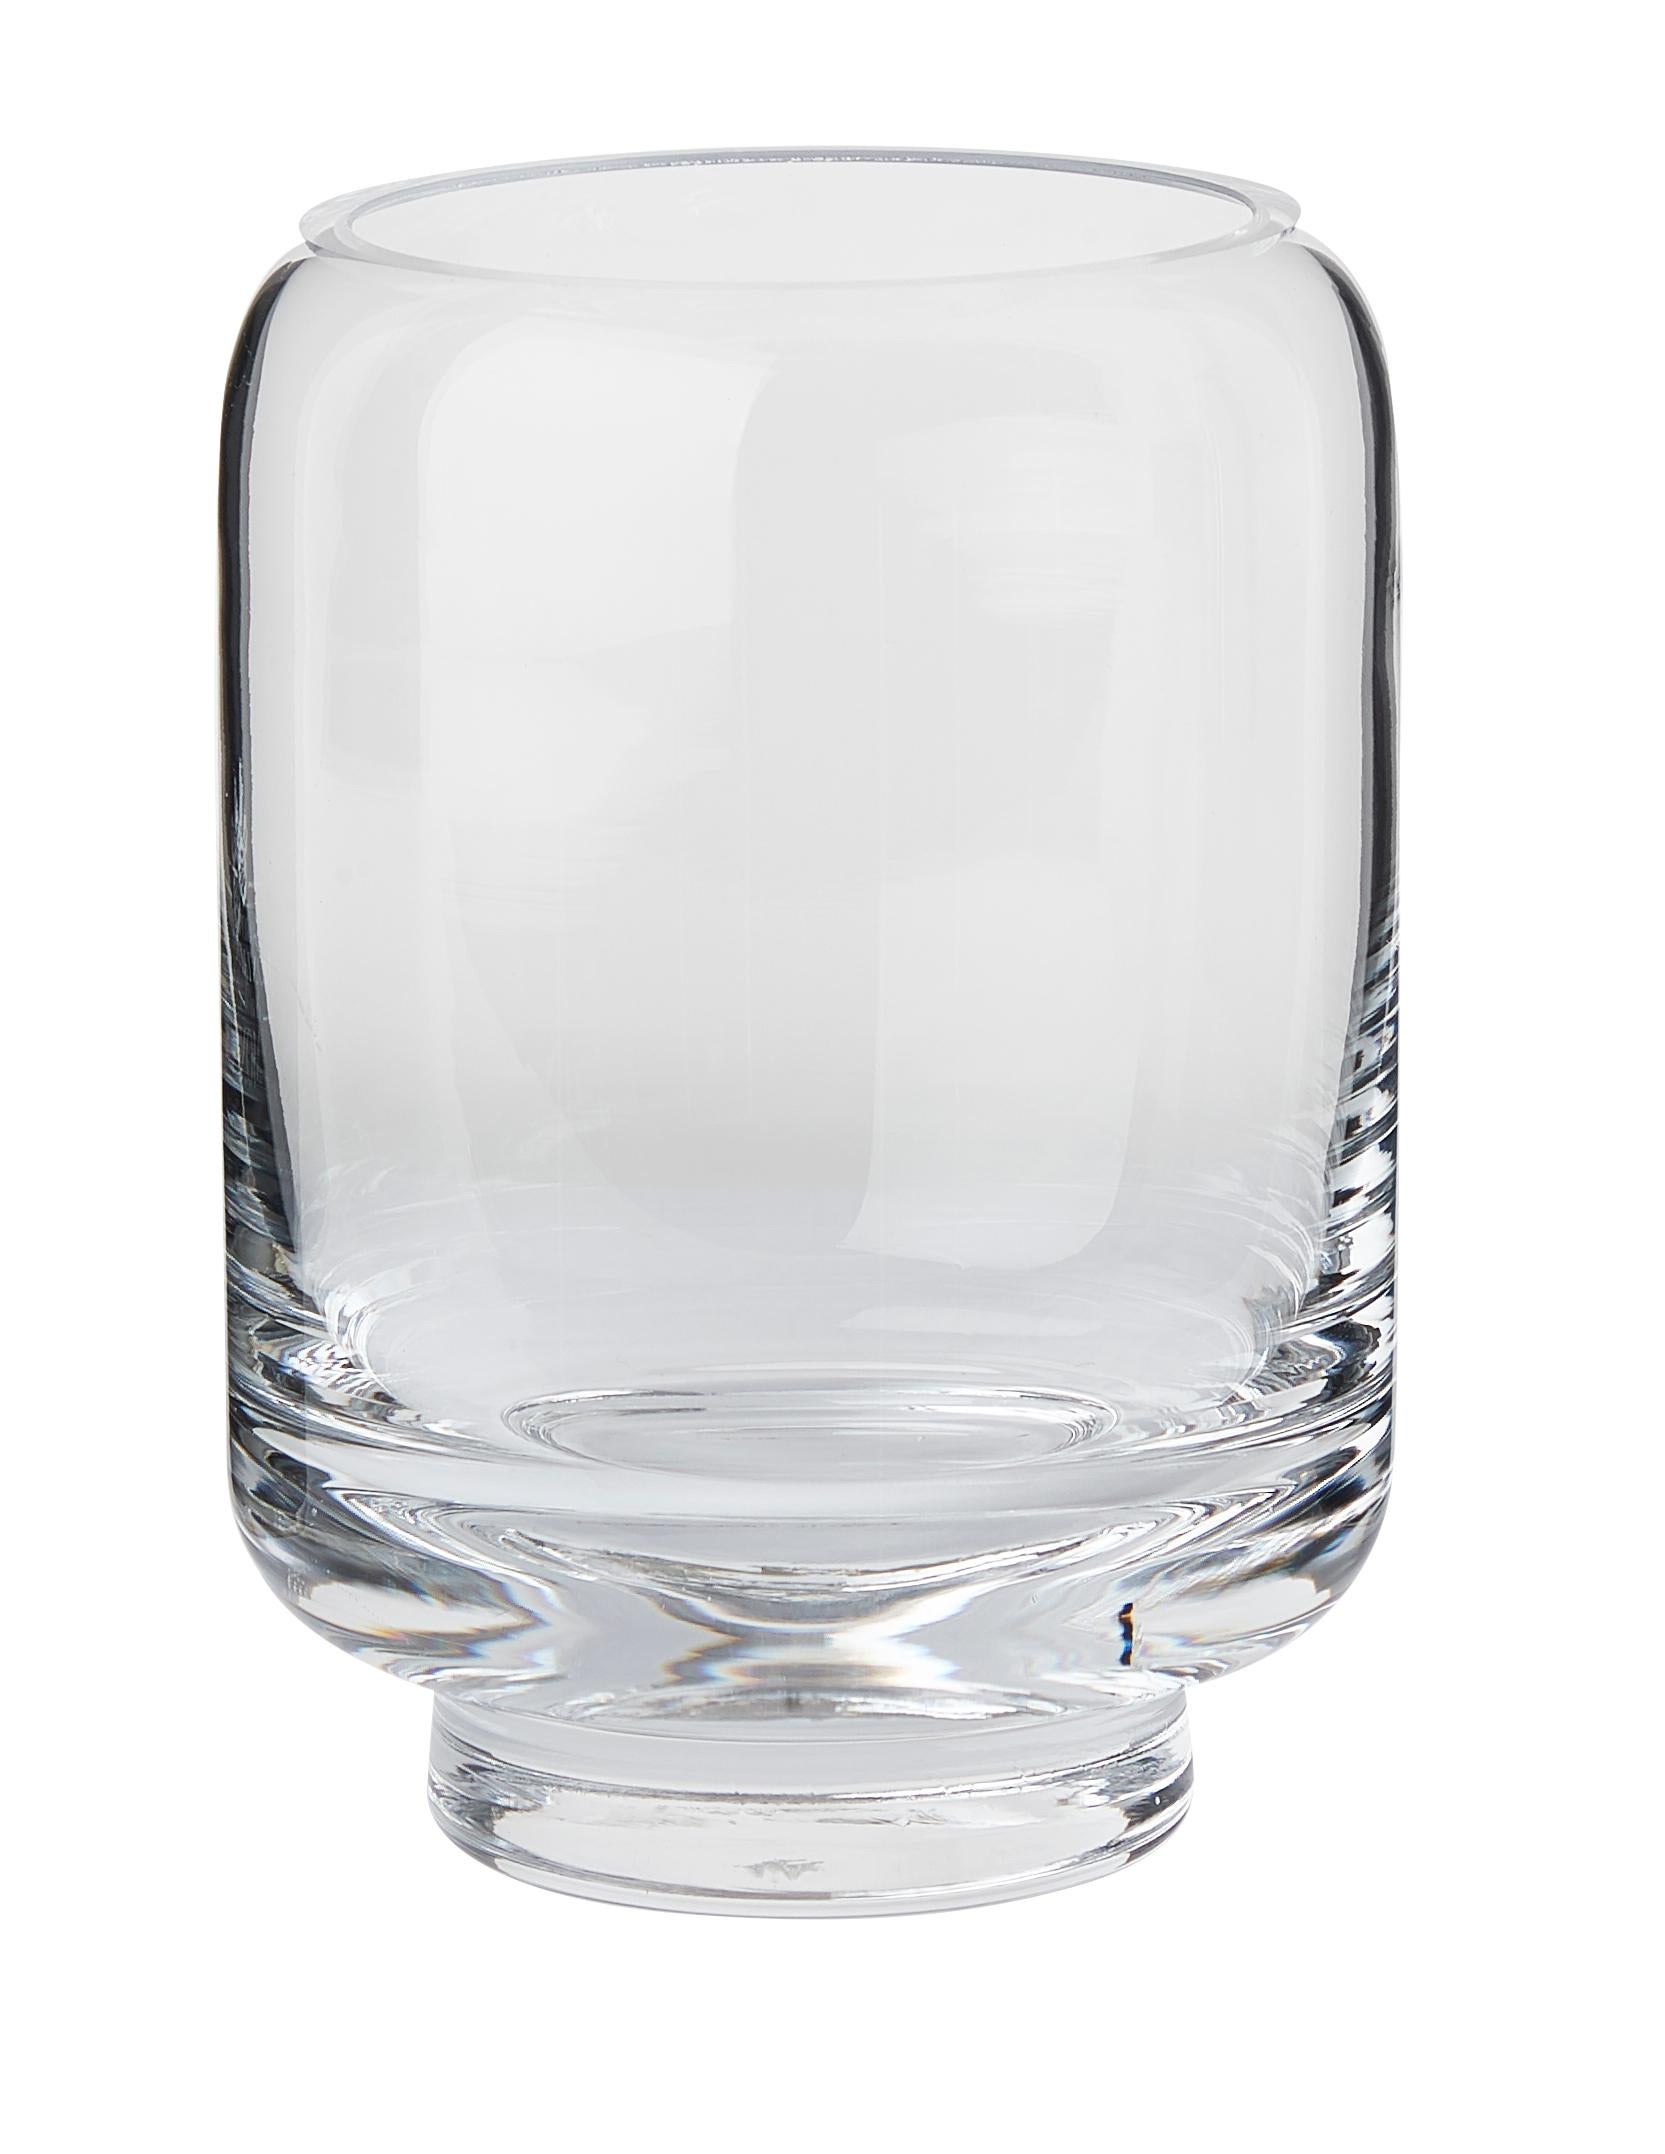 Clear (Clear Glass) Stack Vase, by Studio Føy from Warm Nordic